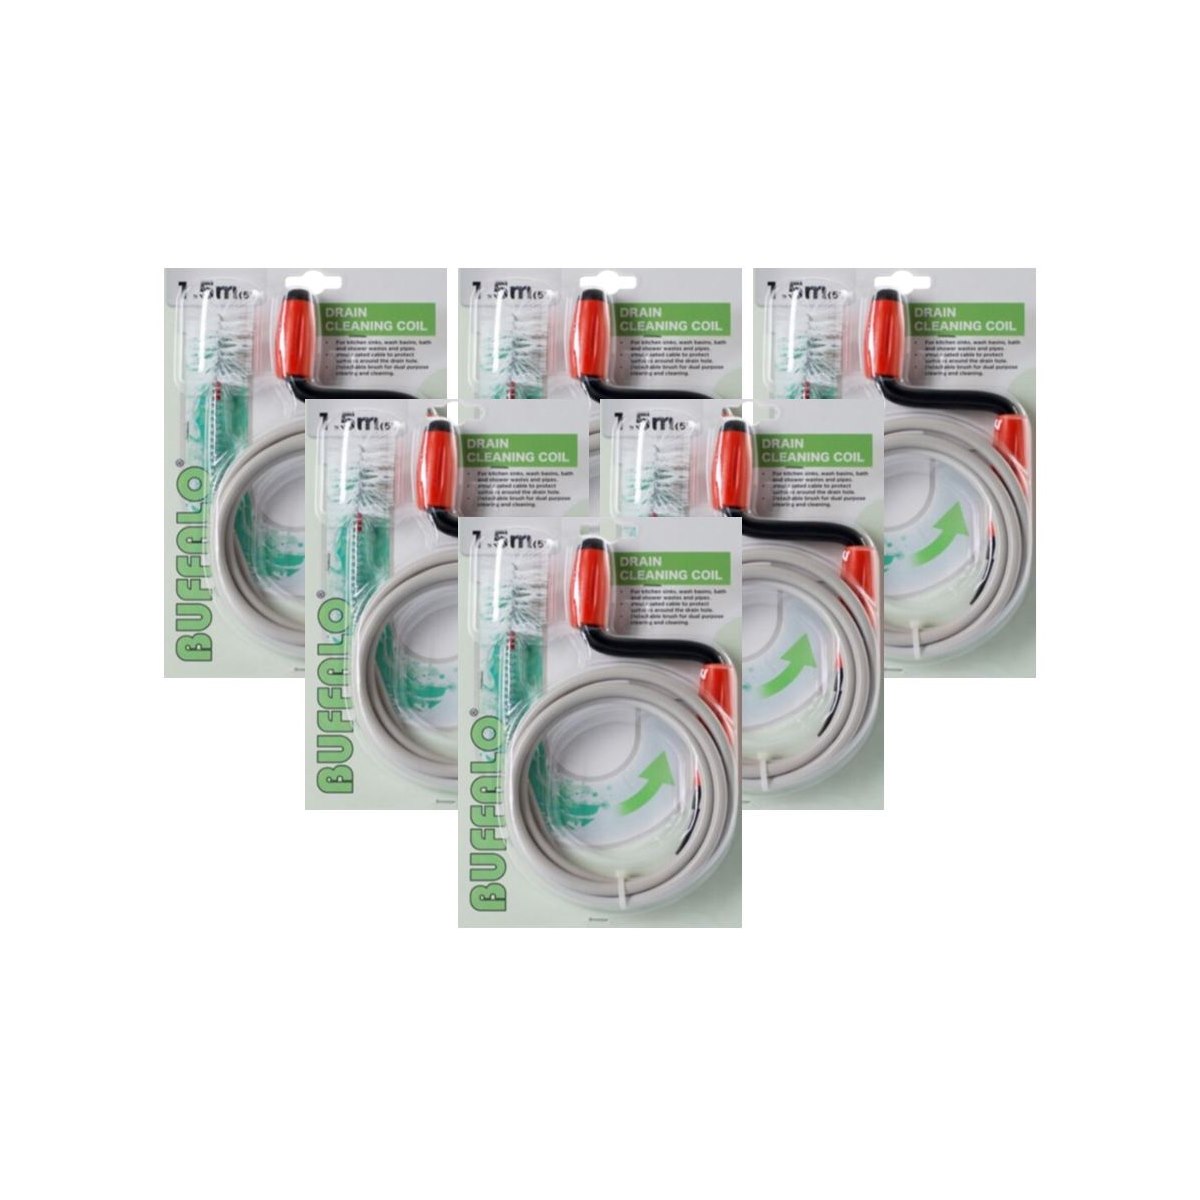 Case of 6 x Buffalo Drain Cleaning Coil 1.5m 5in